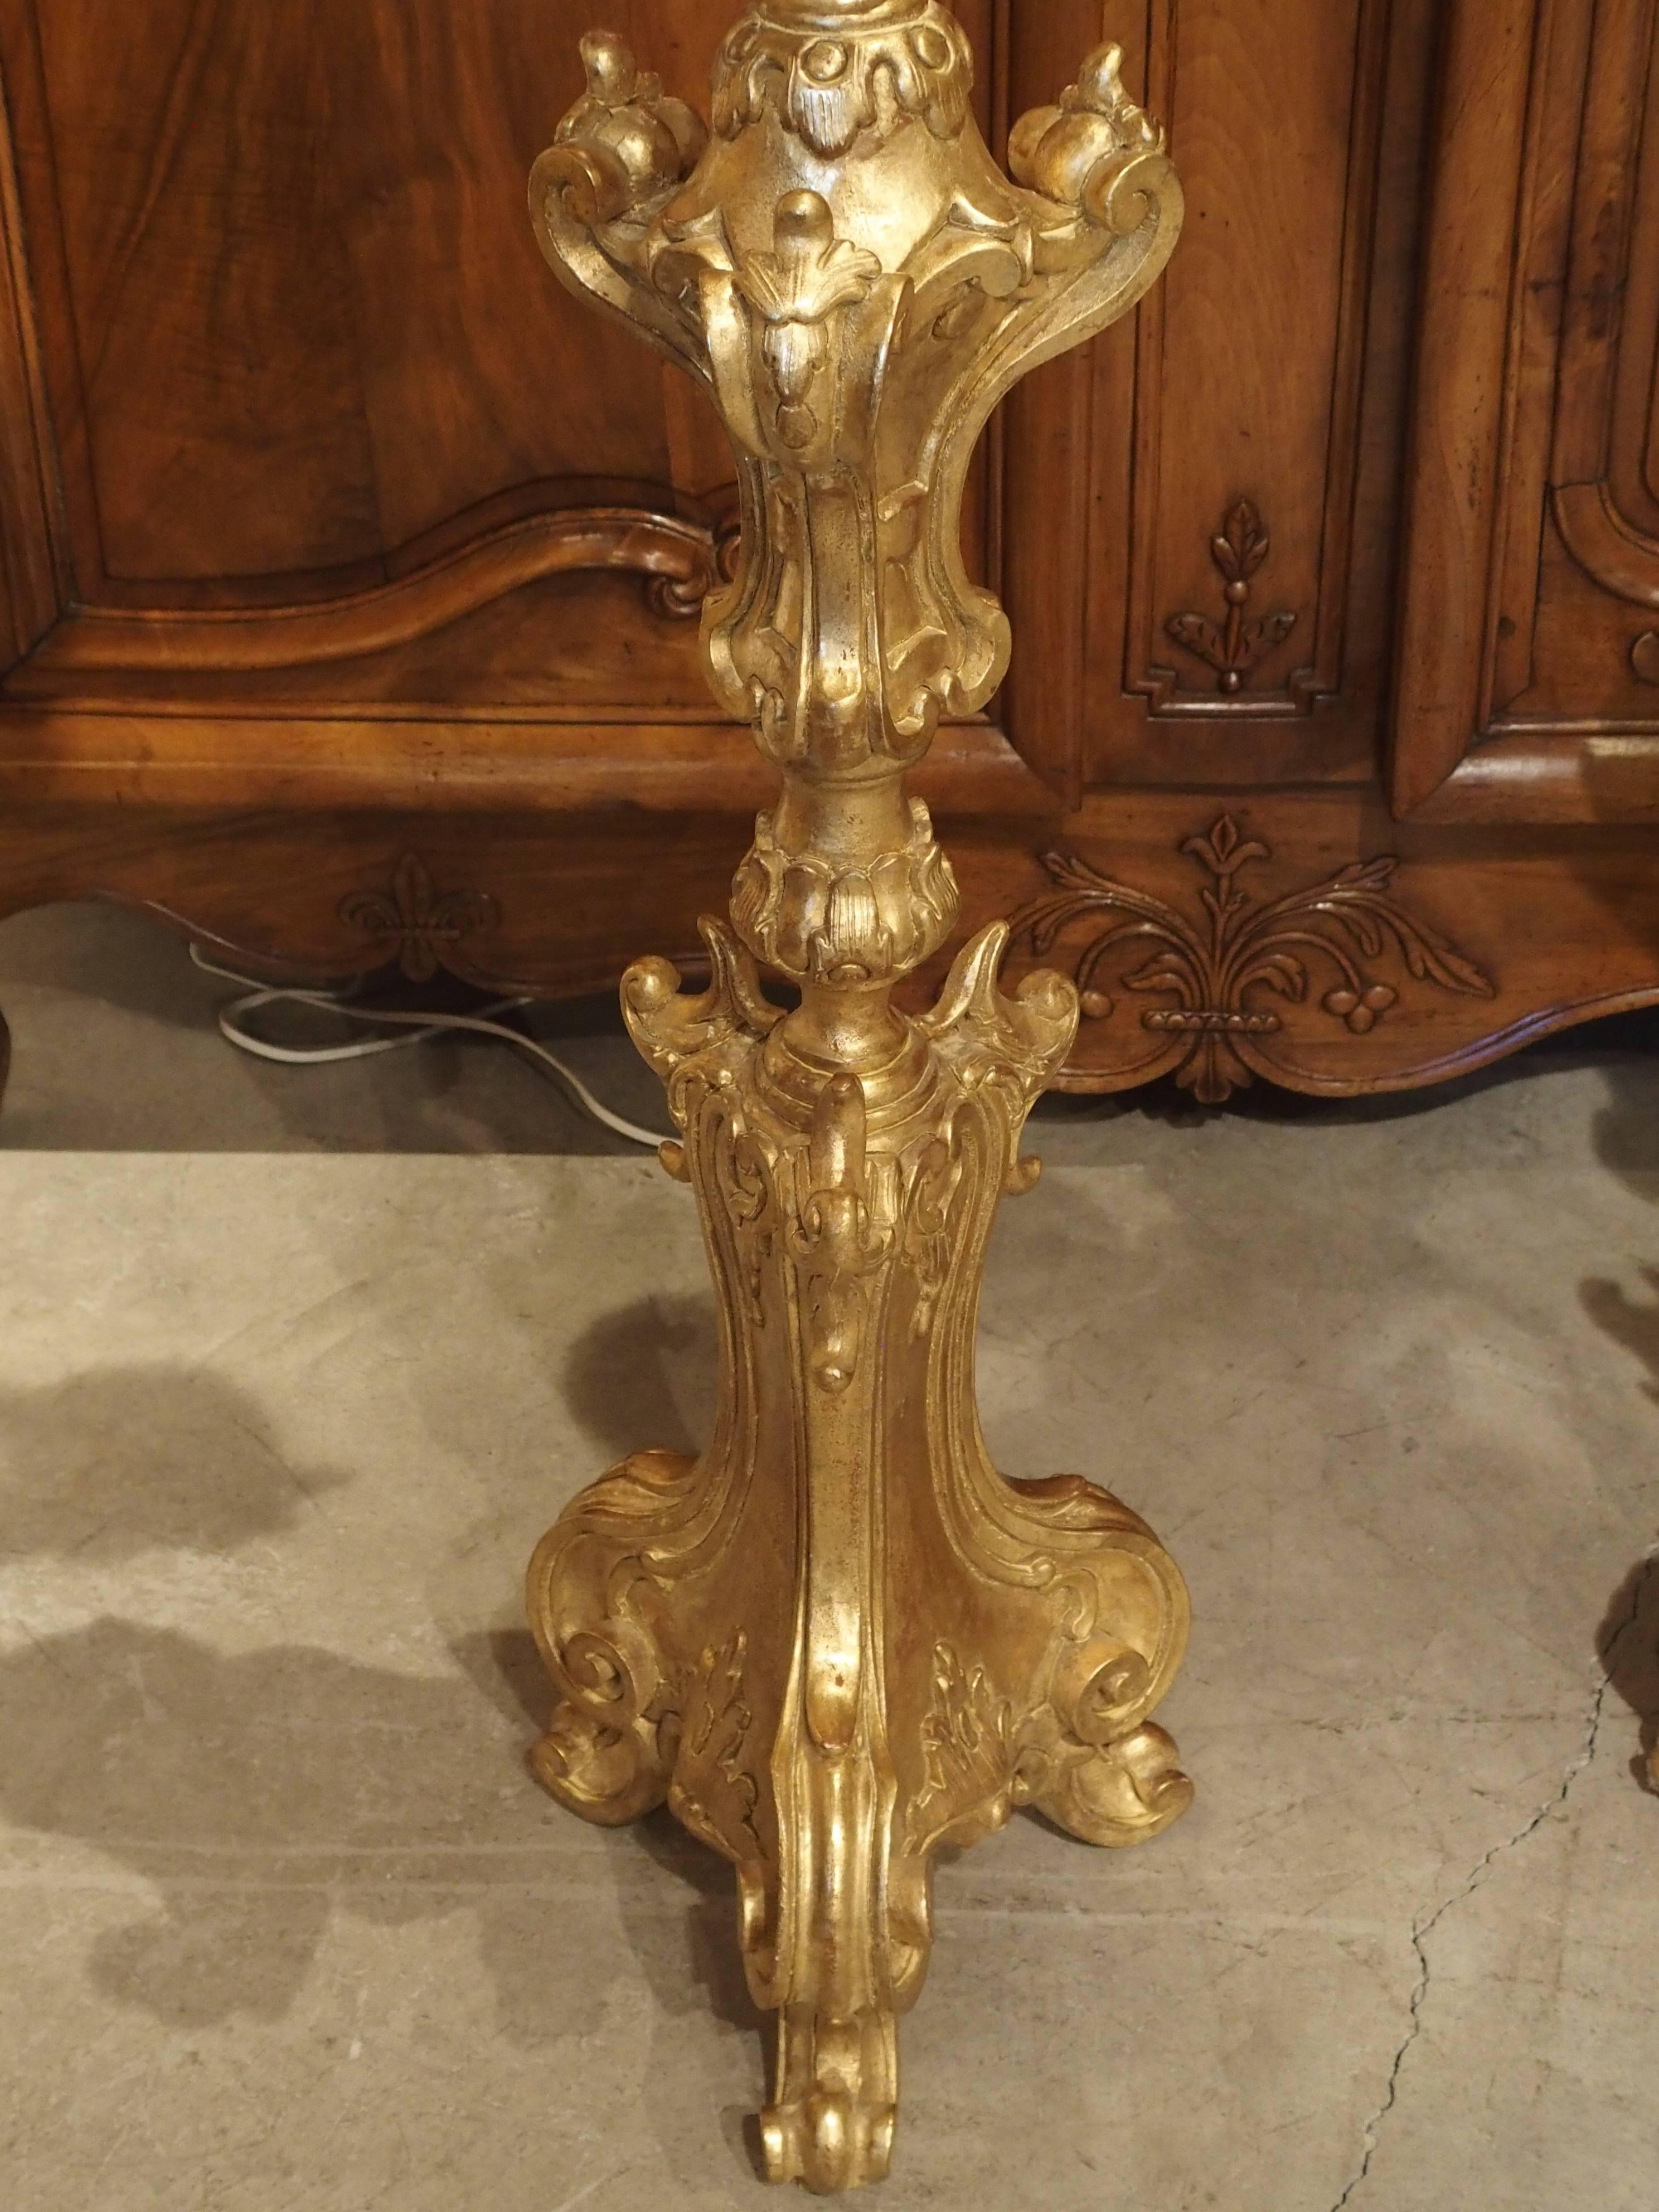 This elegant pair of Louis XV style giltwood torcheres has ten graceful acanthus leaf arms with acanthus leaf candle cups. The central column has decorated foliate motifs and cartouches of varying sizes to add interest to the column. The bases are